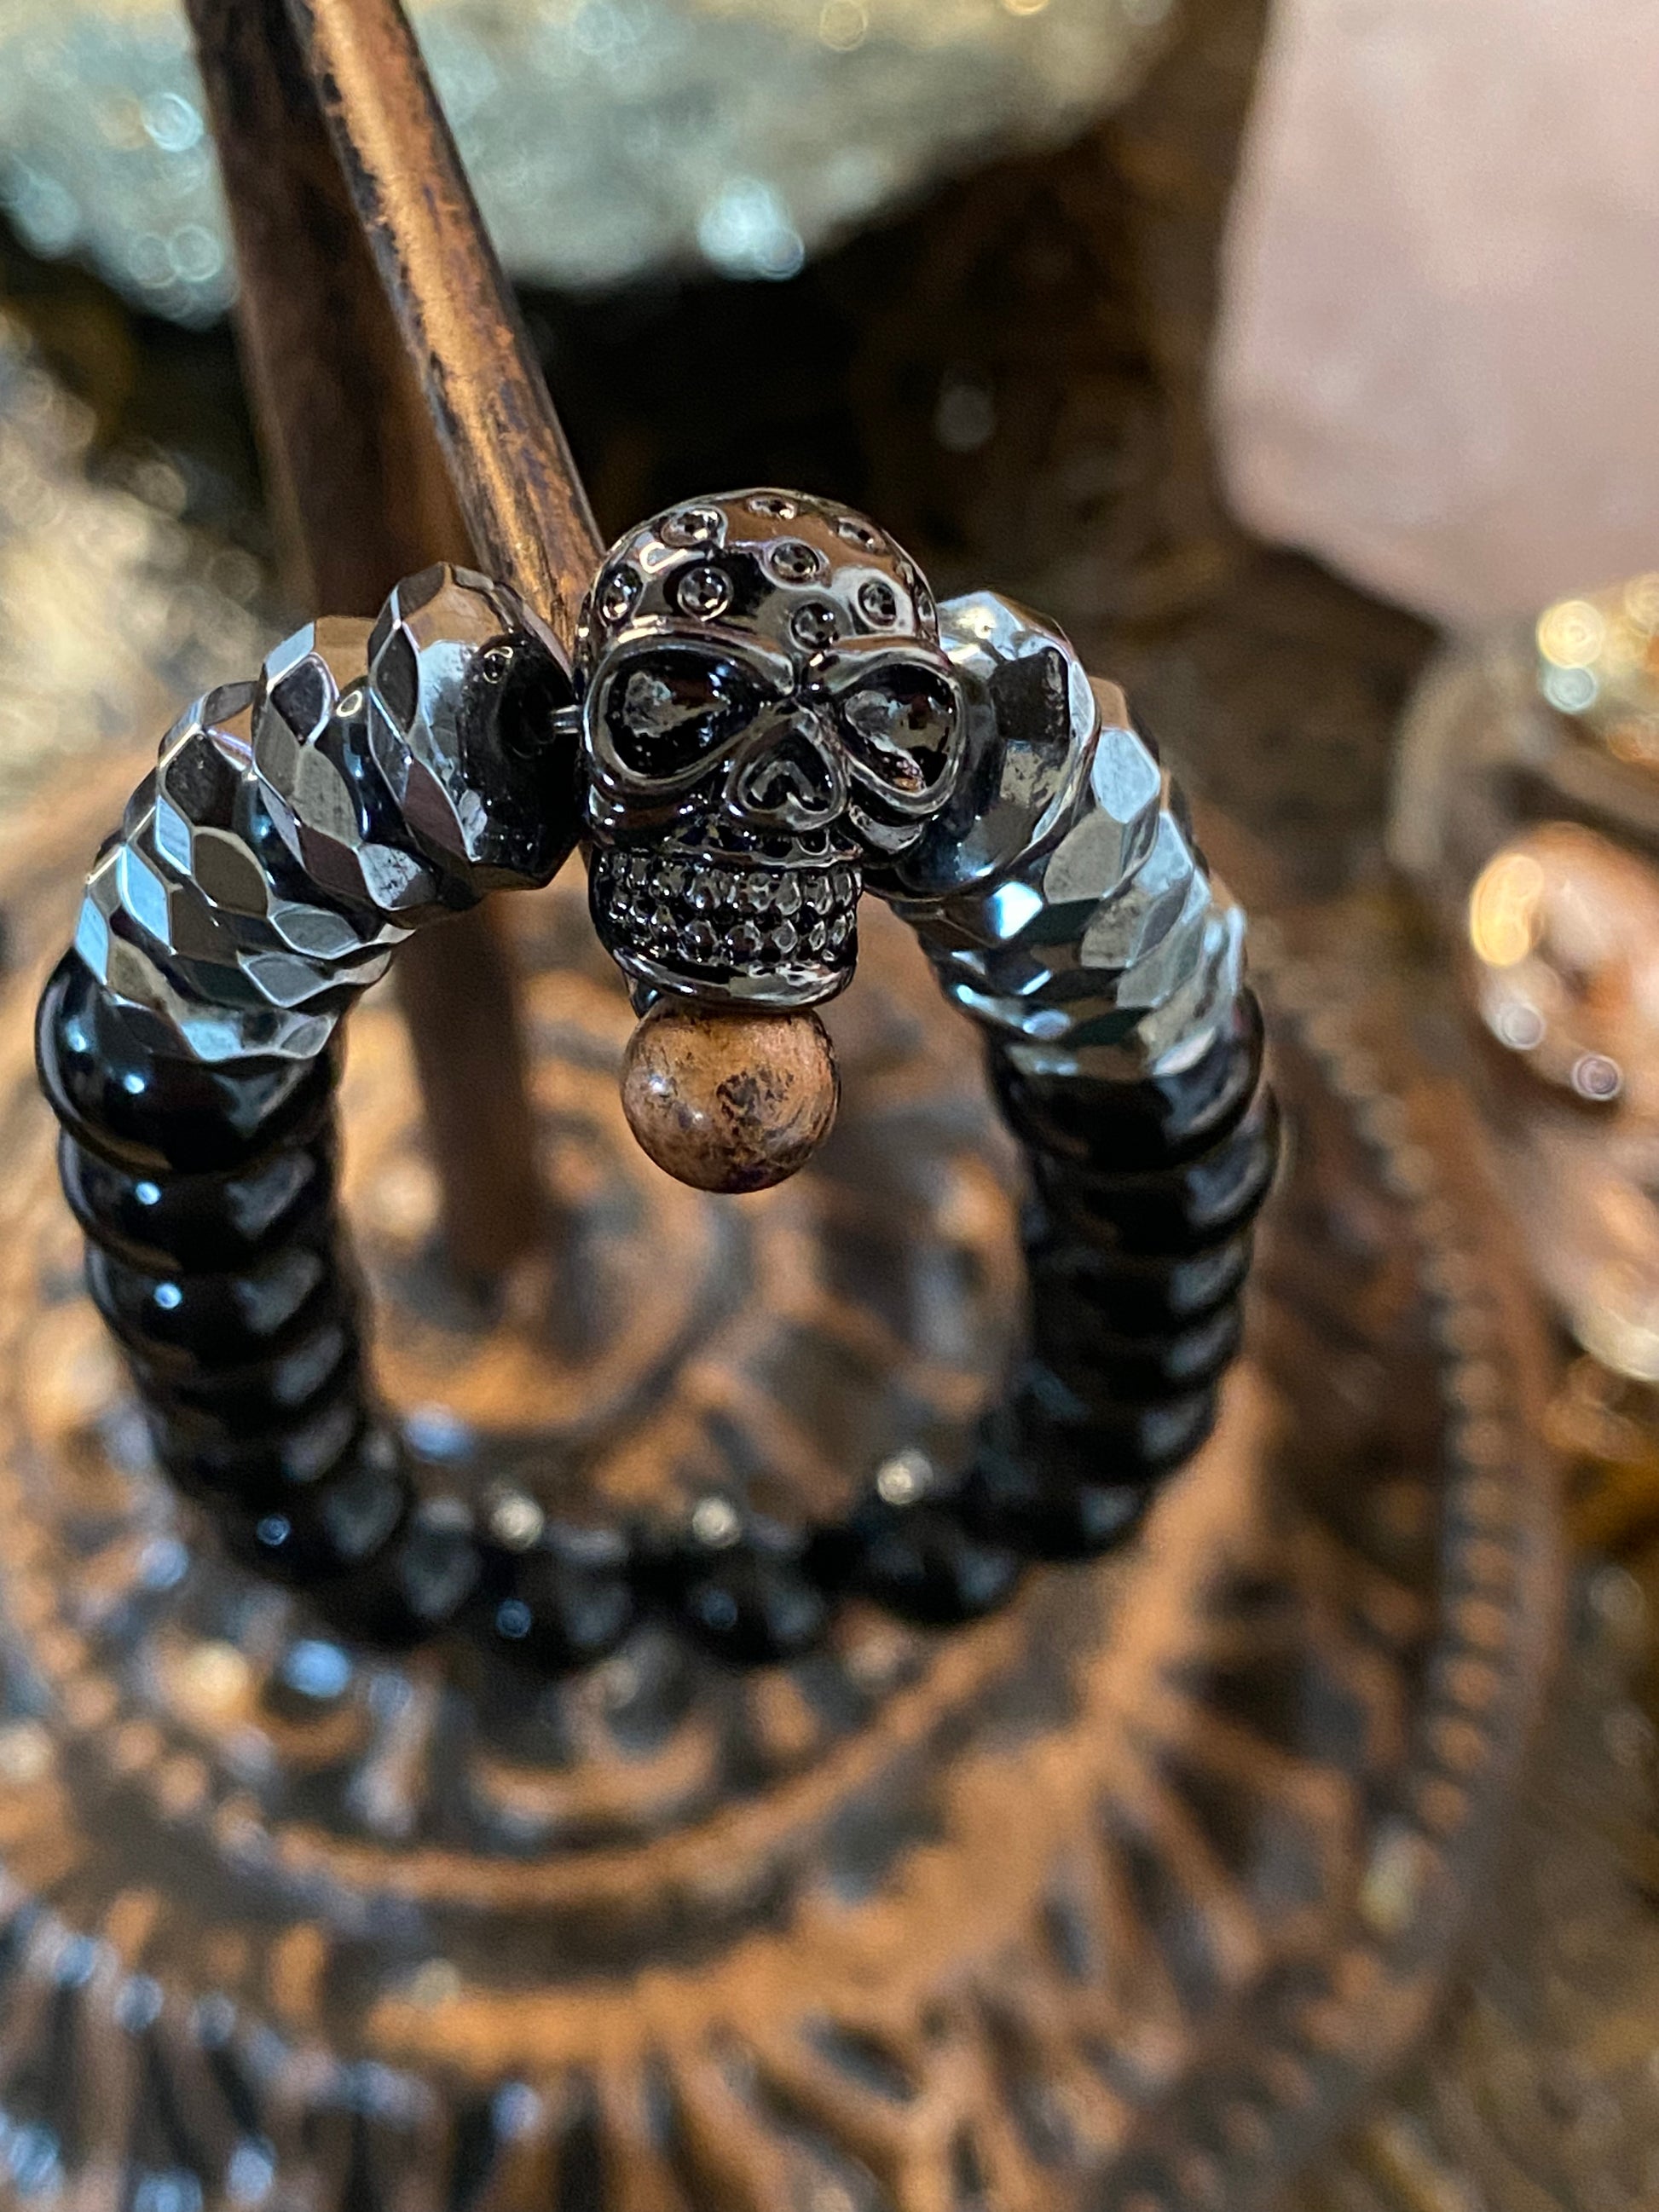 Obsidian and Hematite with Skull Metal Charm - Healing lotus shop